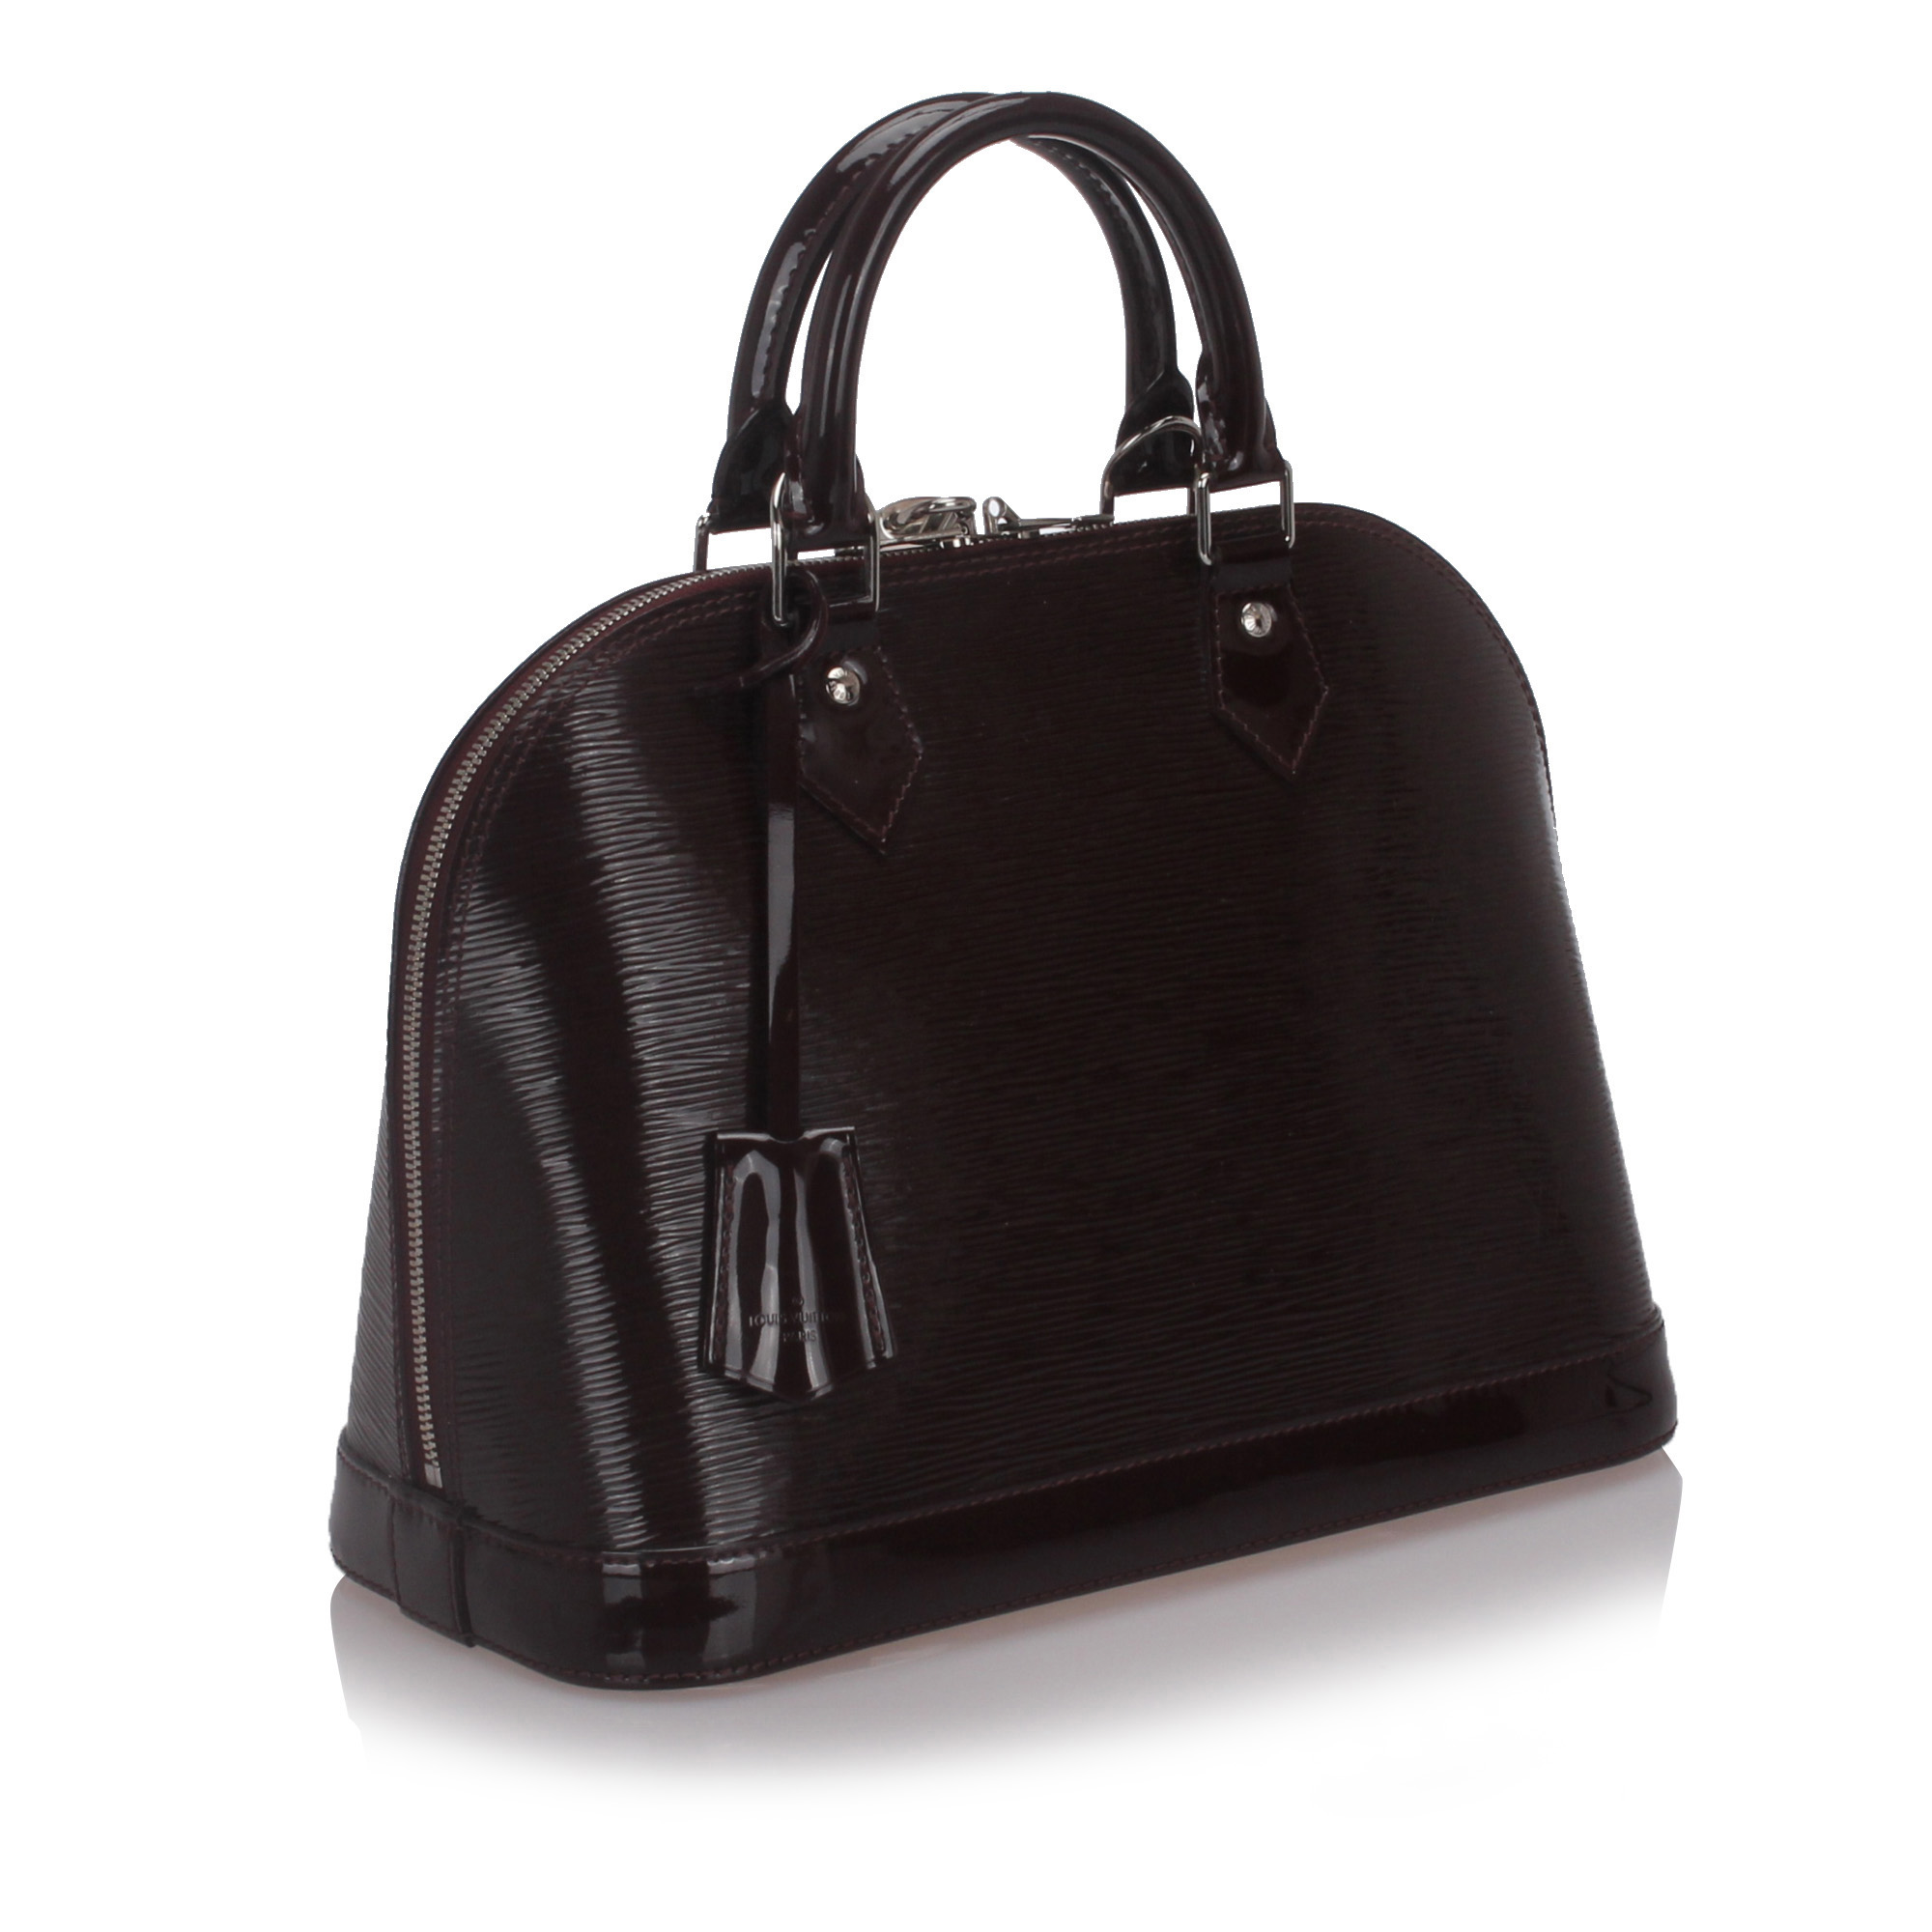 Louis Vuitton Electric Epi Alma PM Bag, The Alma PM features an electric epi leather body, a - Image 2 of 9